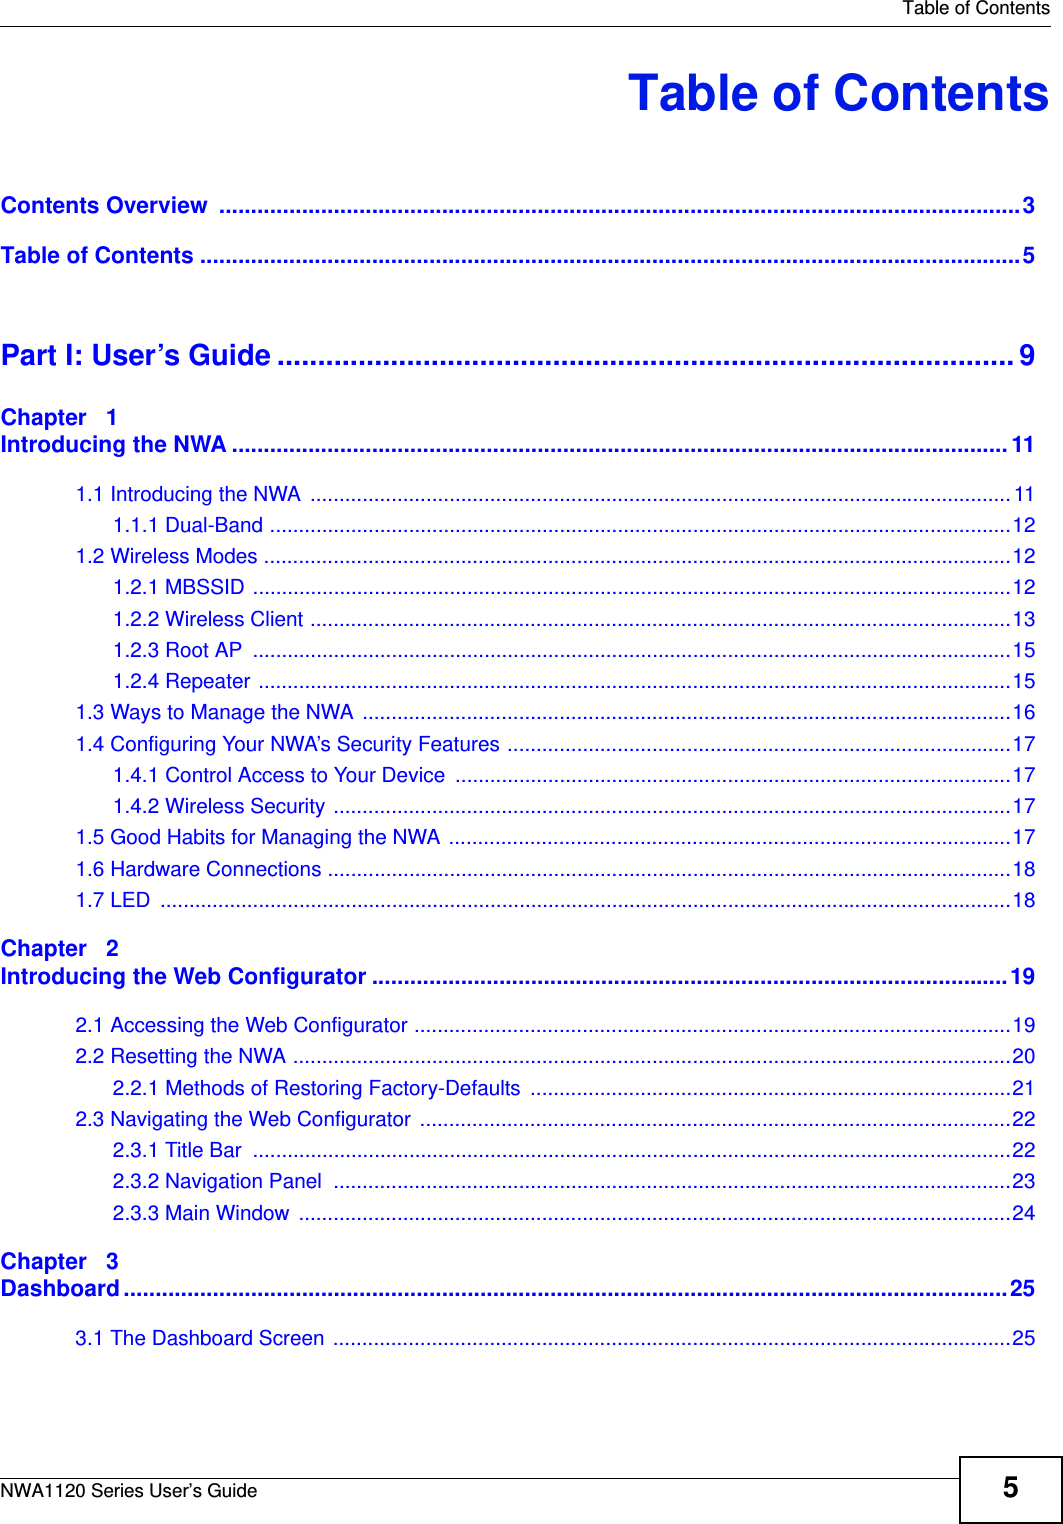   Table of ContentsNWA1120 Series User’s Guide 5Table of ContentsContents Overview  ..............................................................................................................................3Table of Contents .................................................................................................................................5Part I: User’s Guide ........................................................................................... 9Chapter   1Introducing the NWA ..........................................................................................................................111.1 Introducing the NWA .........................................................................................................................111.1.1 Dual-Band ................................................................................................................................121.2 Wireless Modes .................................................................................................................................121.2.1 MBSSID ...................................................................................................................................121.2.2 Wireless Client .........................................................................................................................131.2.3 Root AP  ...................................................................................................................................151.2.4 Repeater ..................................................................................................................................151.3 Ways to Manage the NWA ................................................................................................................161.4 Configuring Your NWA’s Security Features .......................................................................................171.4.1 Control Access to Your Device ................................................................................................171.4.2 Wireless Security .....................................................................................................................171.5 Good Habits for Managing the NWA .................................................................................................171.6 Hardware Connections ......................................................................................................................181.7 LED  ...................................................................................................................................................18Chapter   2Introducing the Web Configurator ....................................................................................................192.1 Accessing the Web Configurator .......................................................................................................192.2 Resetting the NWA ............................................................................................................................202.2.1 Methods of Restoring Factory-Defaults ...................................................................................212.3 Navigating the Web Configurator ......................................................................................................222.3.1 Title Bar  ...................................................................................................................................222.3.2 Navigation Panel  .....................................................................................................................232.3.3 Main Window  ...........................................................................................................................24Chapter   3Dashboard...........................................................................................................................................253.1 The Dashboard Screen .....................................................................................................................25